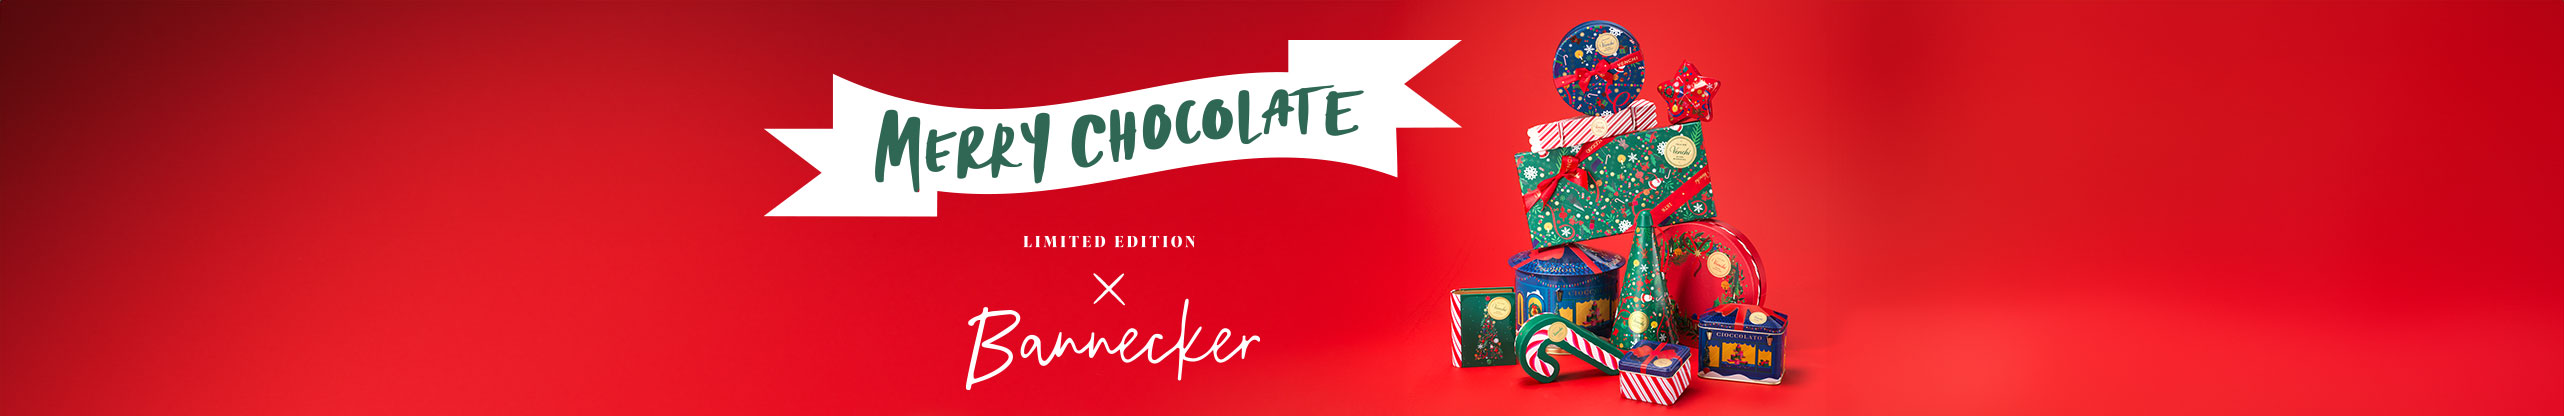 Merry Chocolate limited edition x Bannecker